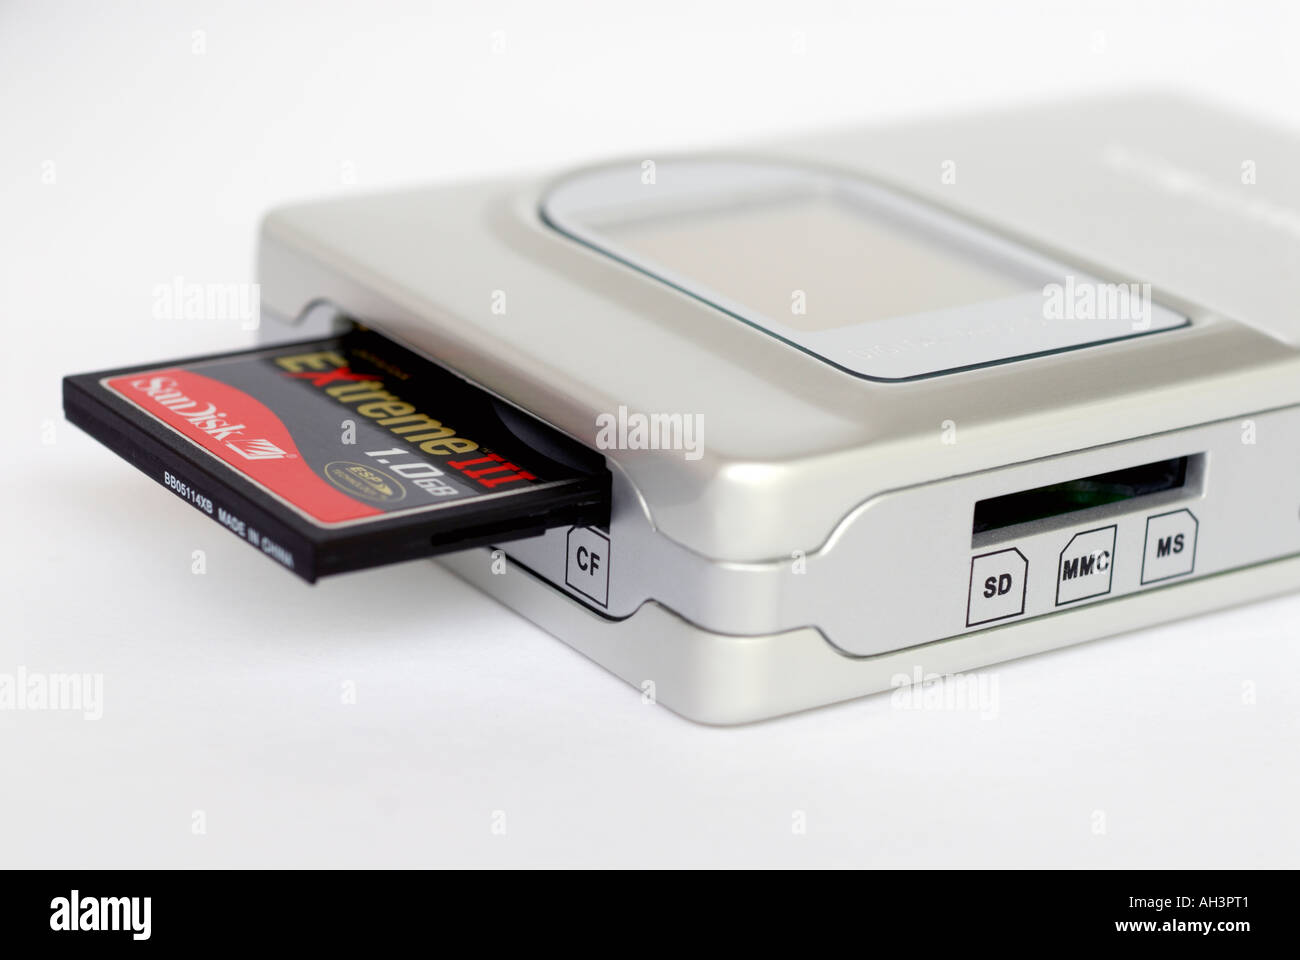 Portable hard drive card reader compact flash card attached.  Editorial use only Stock Photo - Alamy